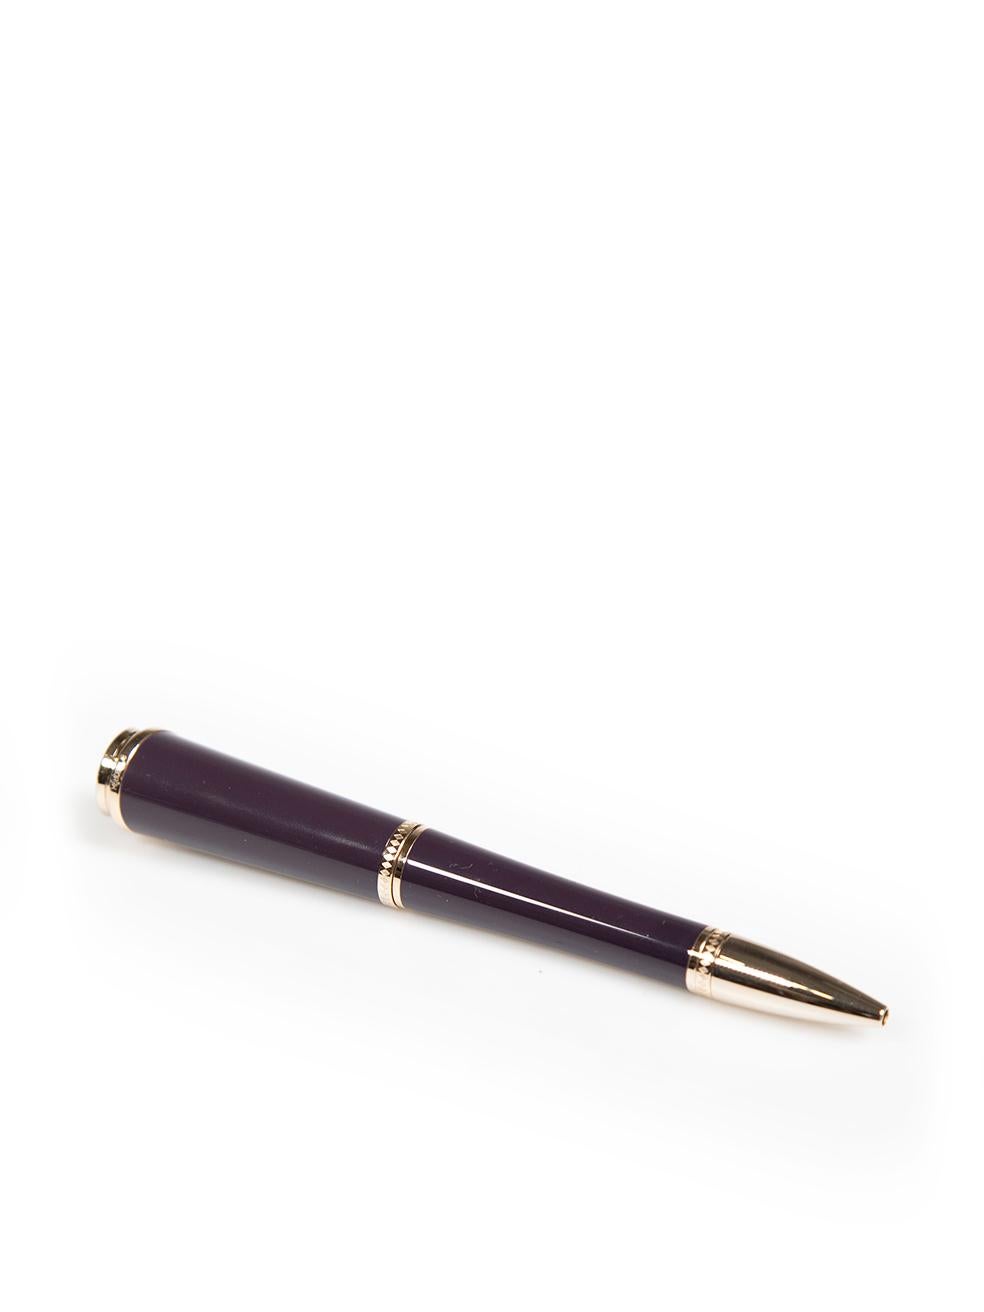 CONDITION is Very good. Hardly any visible wear to pen is evident on this used Montblanc designer resale item. This item comes with original box.
 
 
 
 Details
 
 
 Model: Princesse Grace de Monaco
 
 Purple
 
 Resin
 
 Ballpoint pen
 
 Champagne